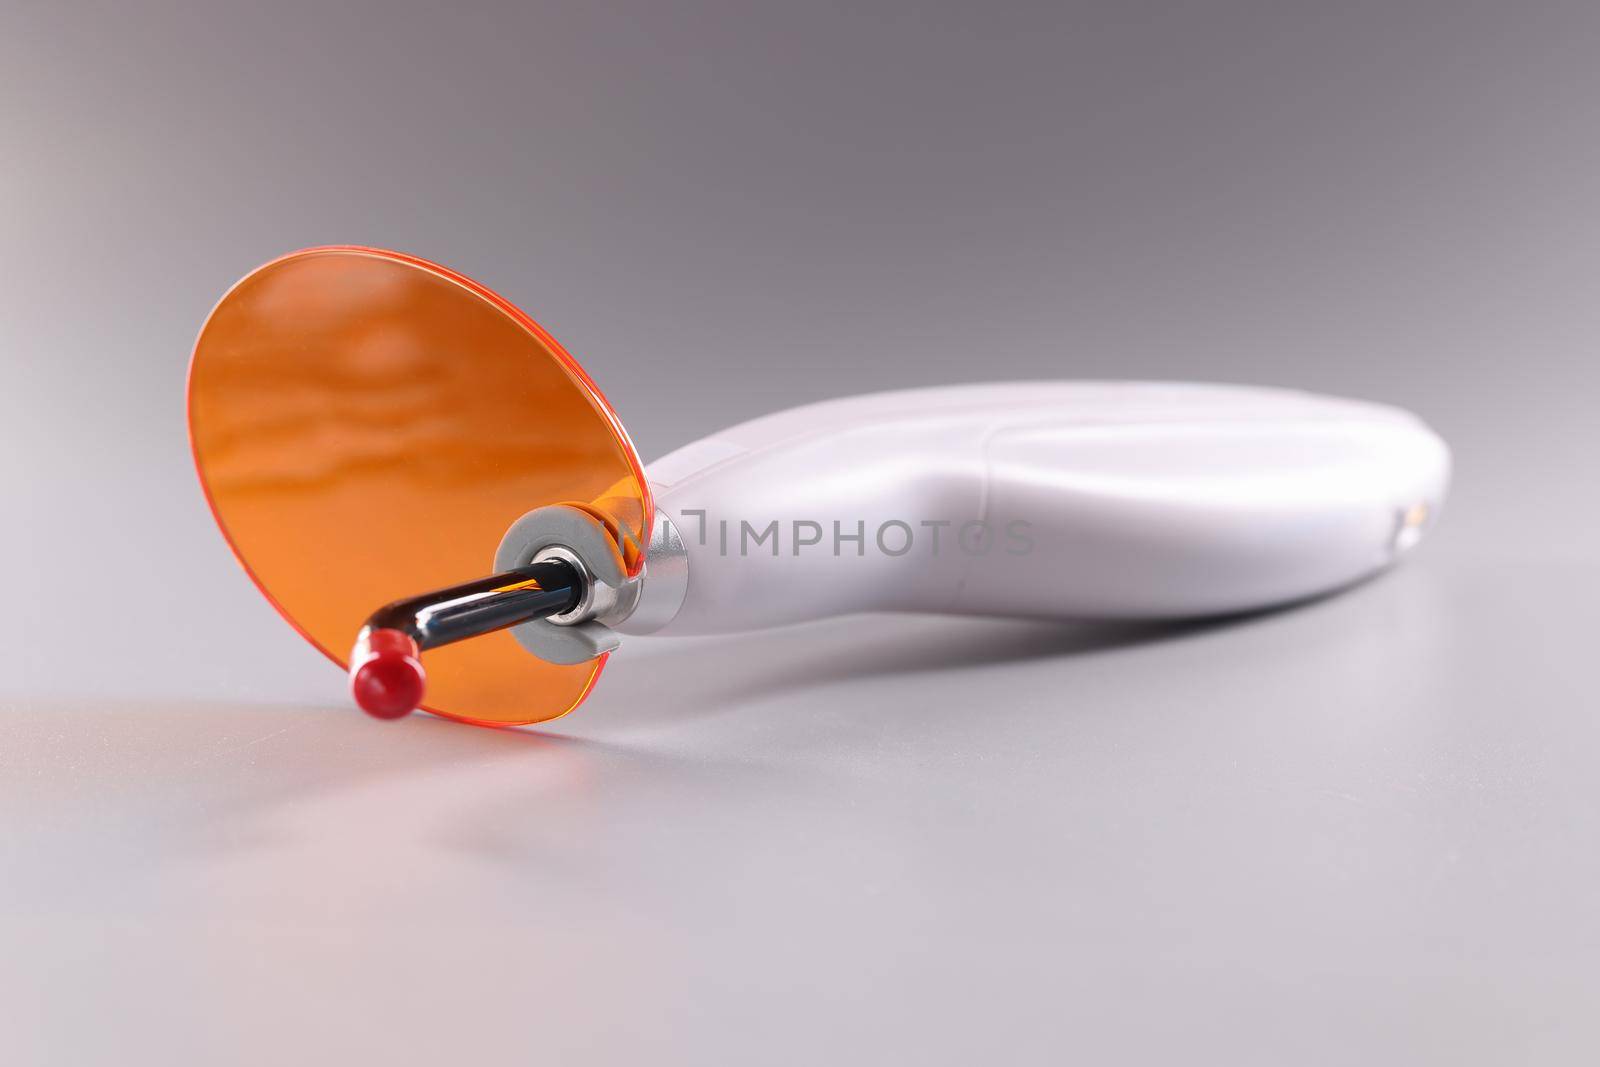 Polymerizer, electrical stomatological tool with orange protective by kuprevich